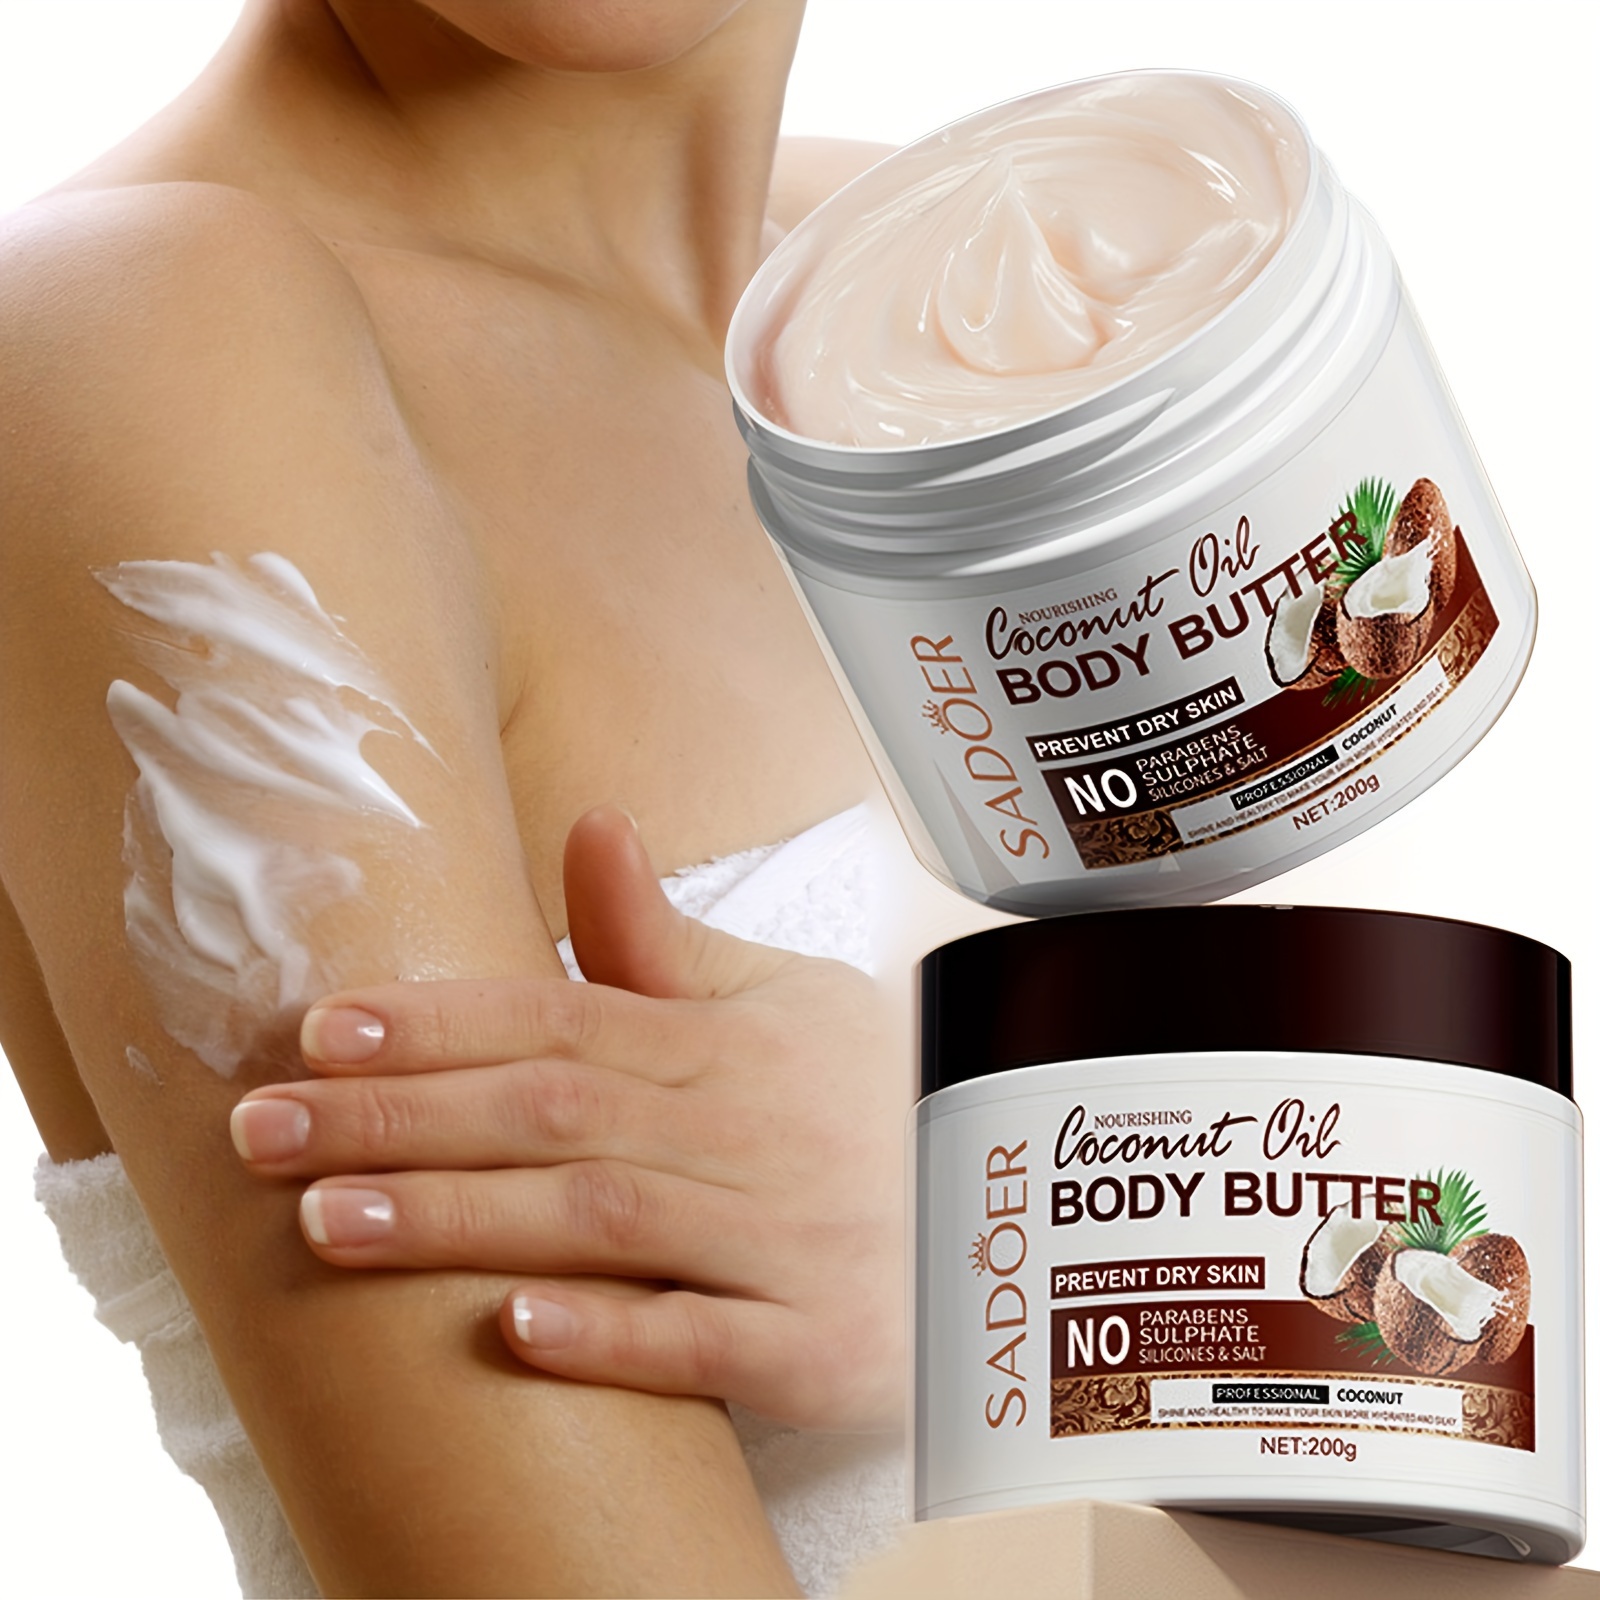 

Coconut Butter Body Lotion Long Lasting Fragrance Nourishing Moisturizing Skin And Makes The Skin Elastic 200g (7.05oz) With Plant Squalane